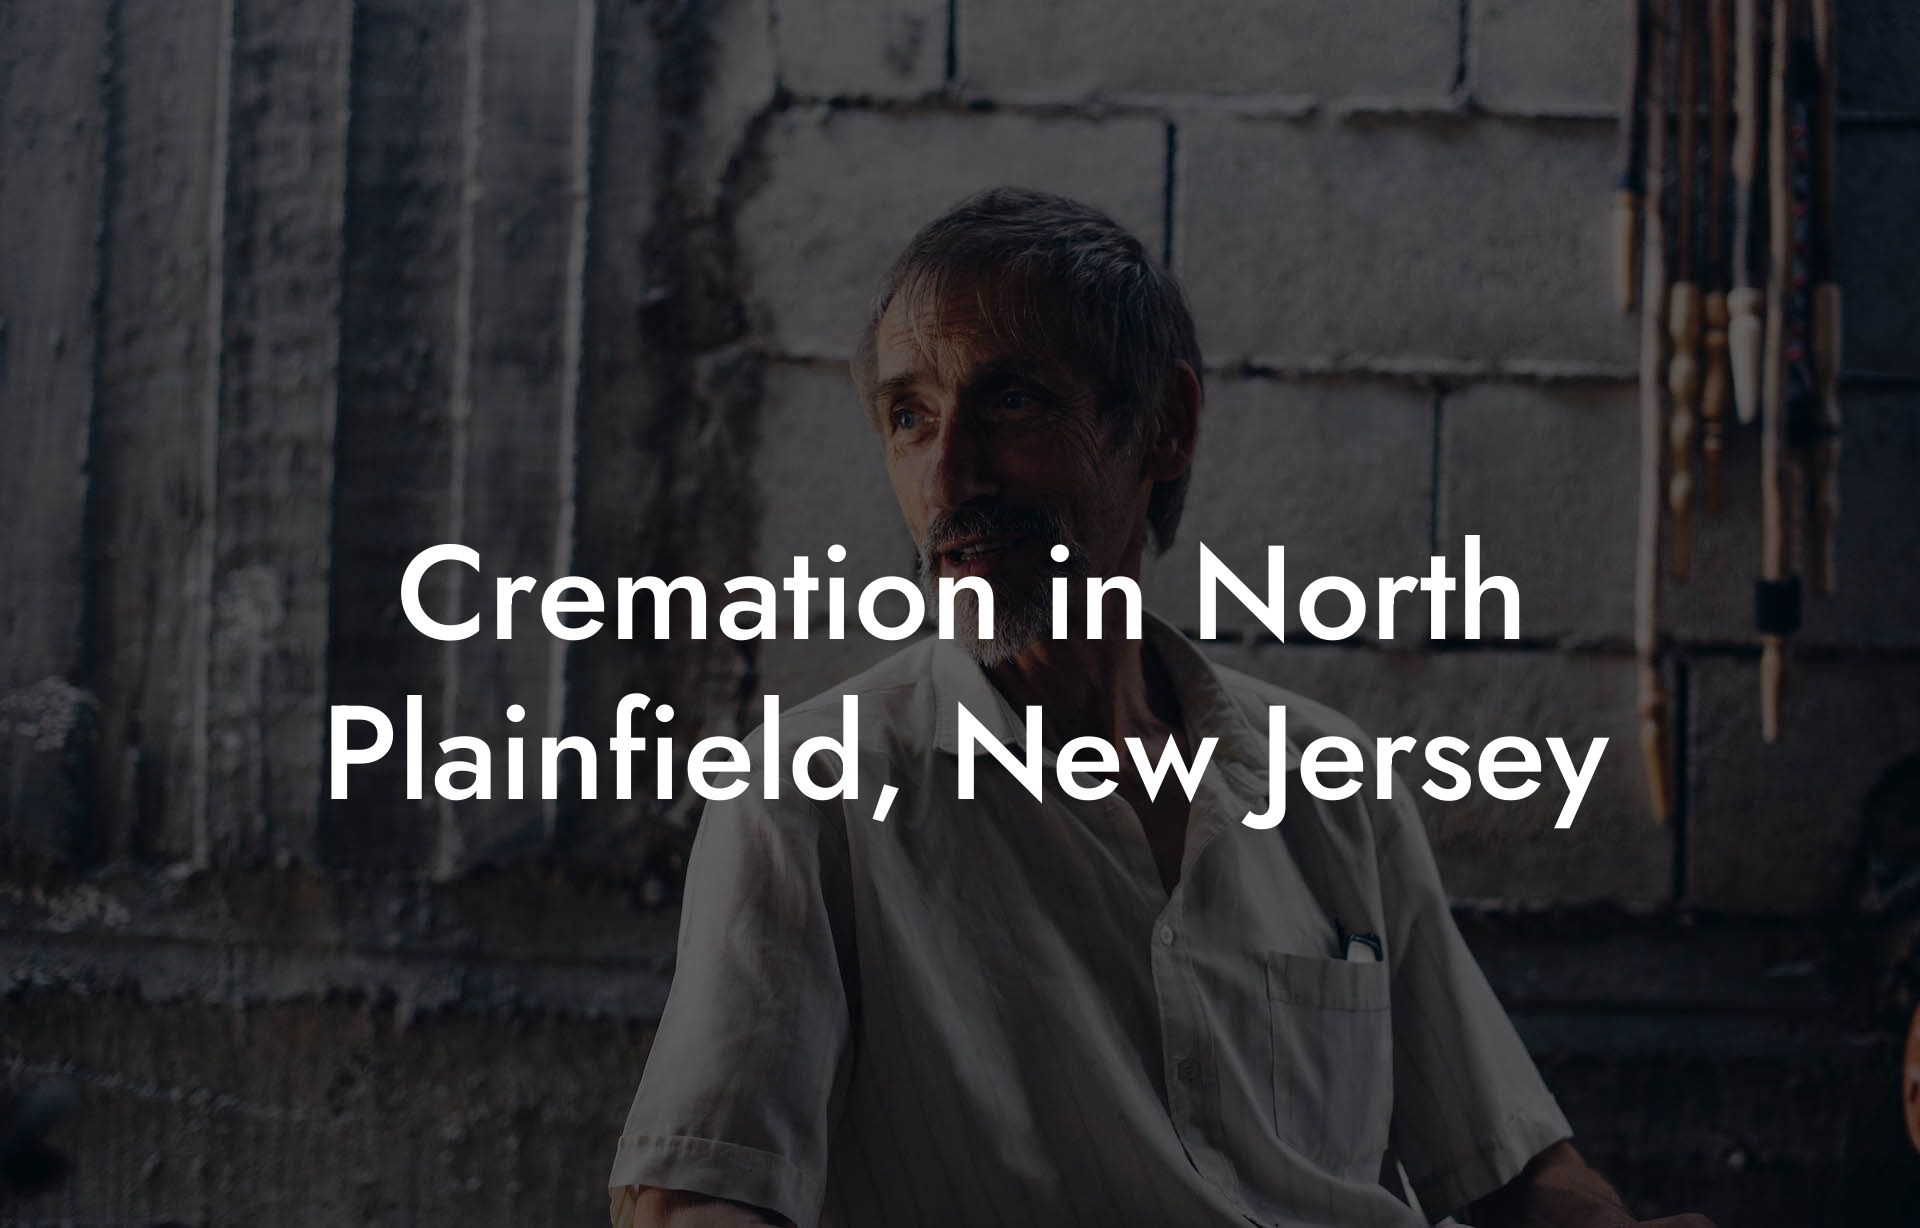 Cremation in North Plainfield, New Jersey